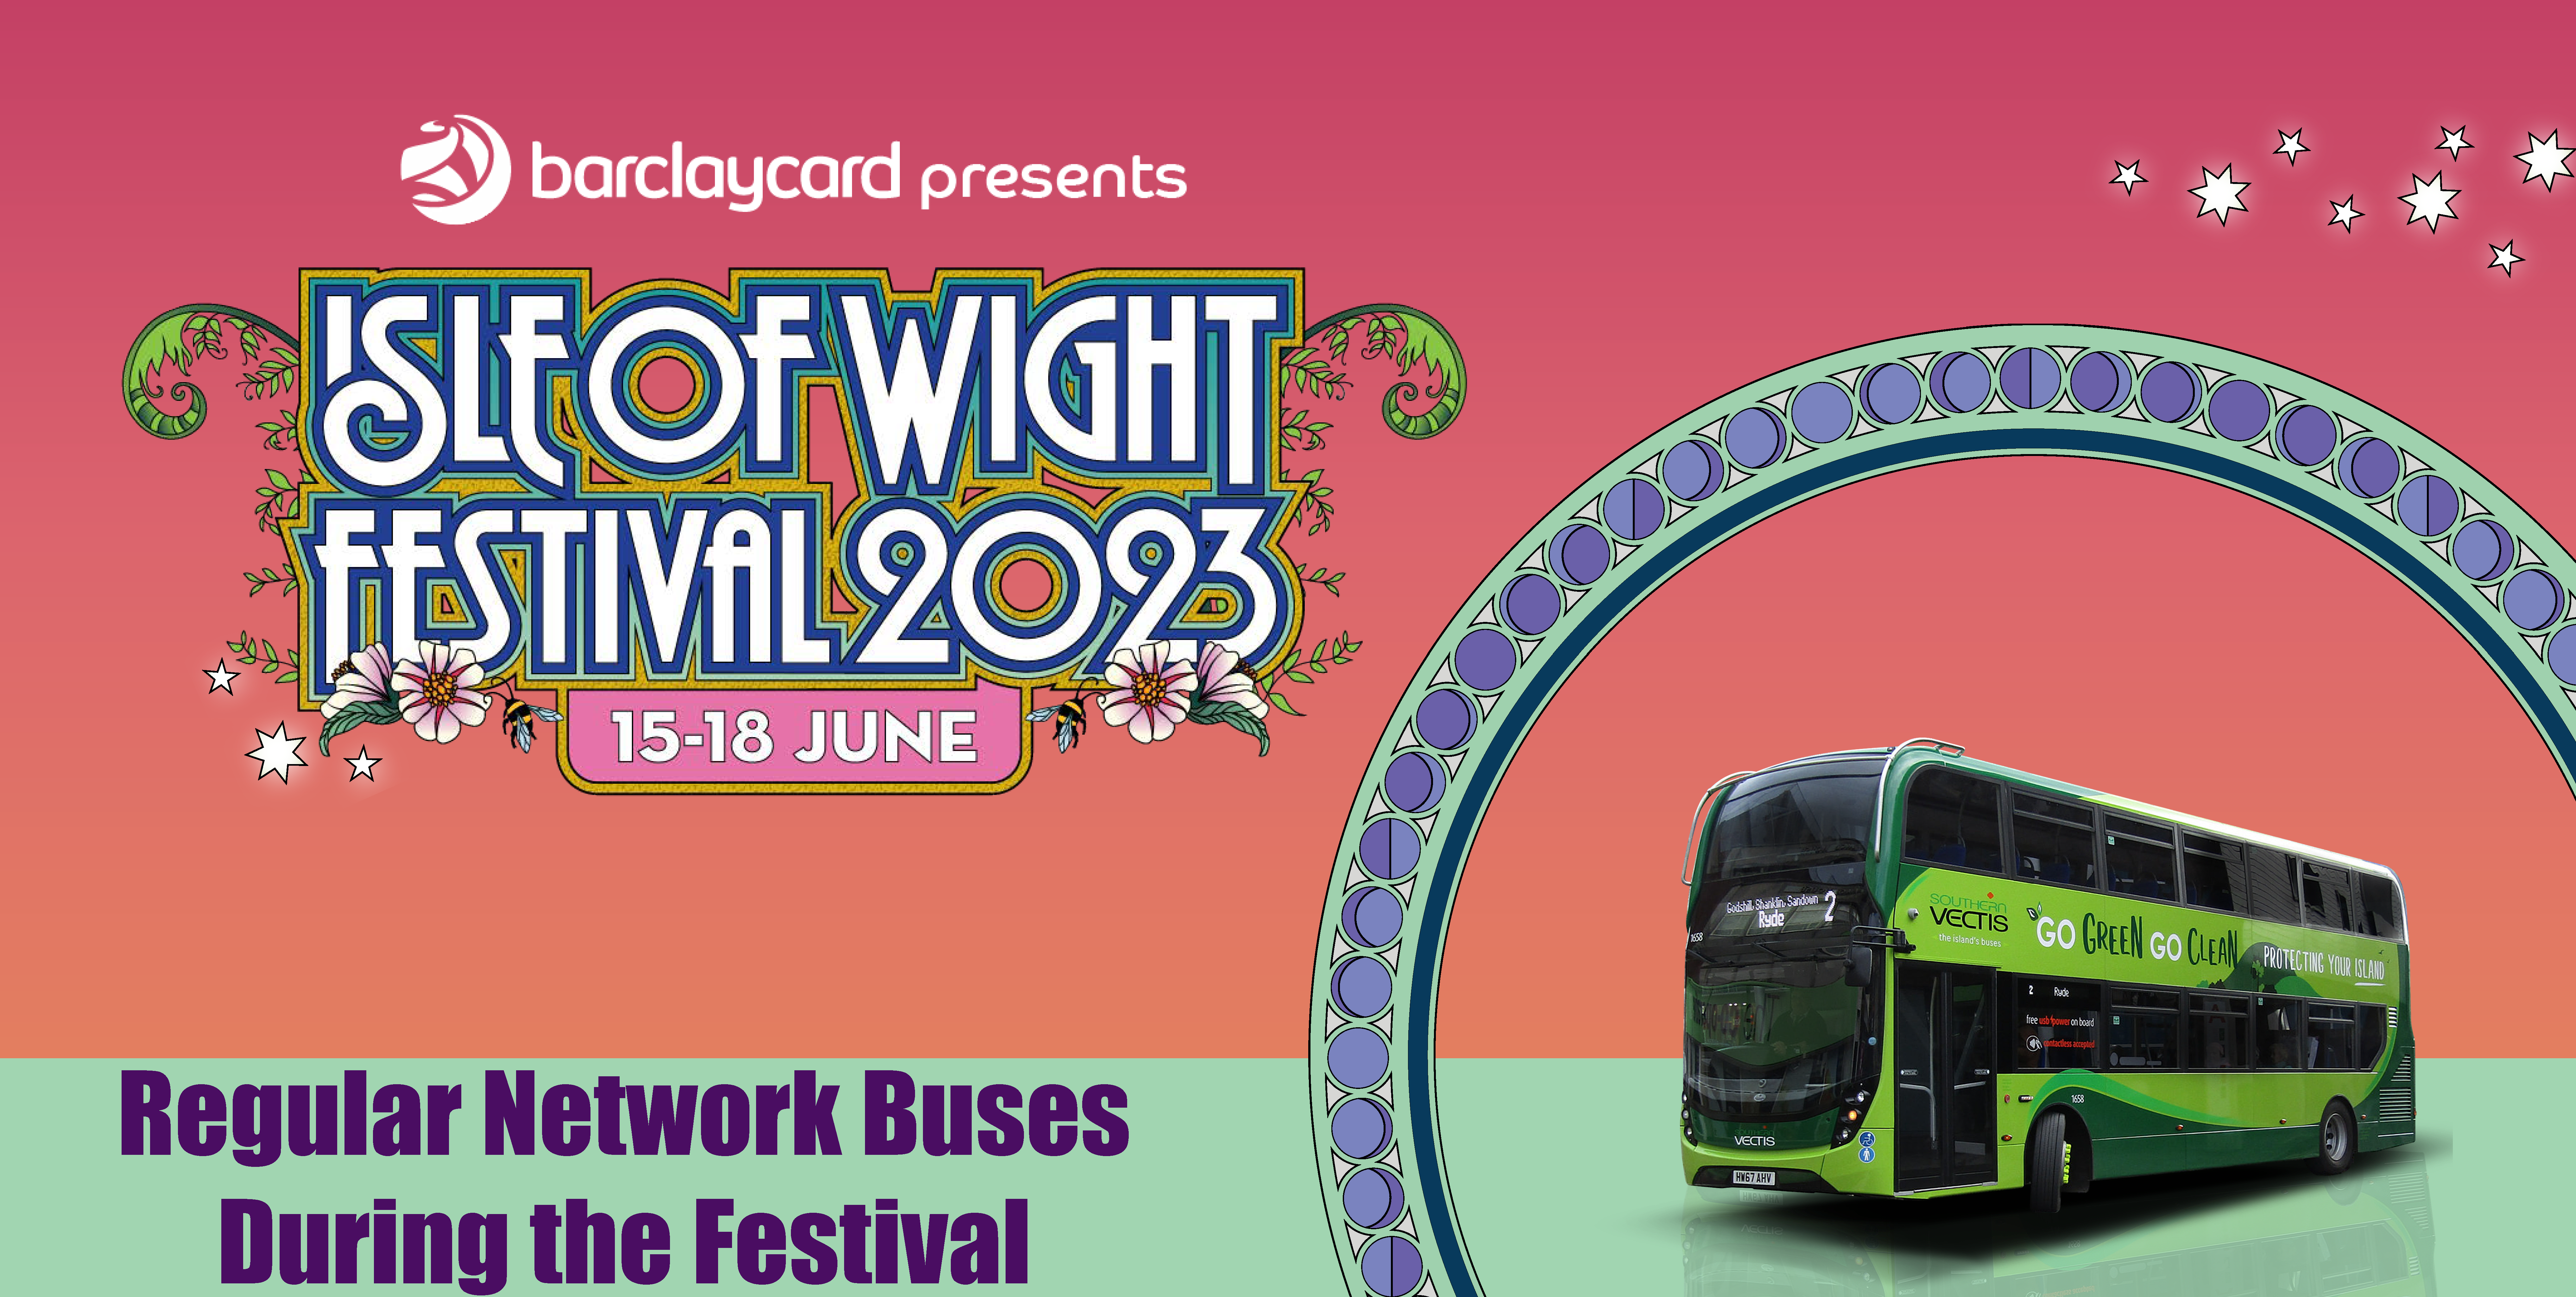 Regular Network Buses during the Isle of Wight Festival